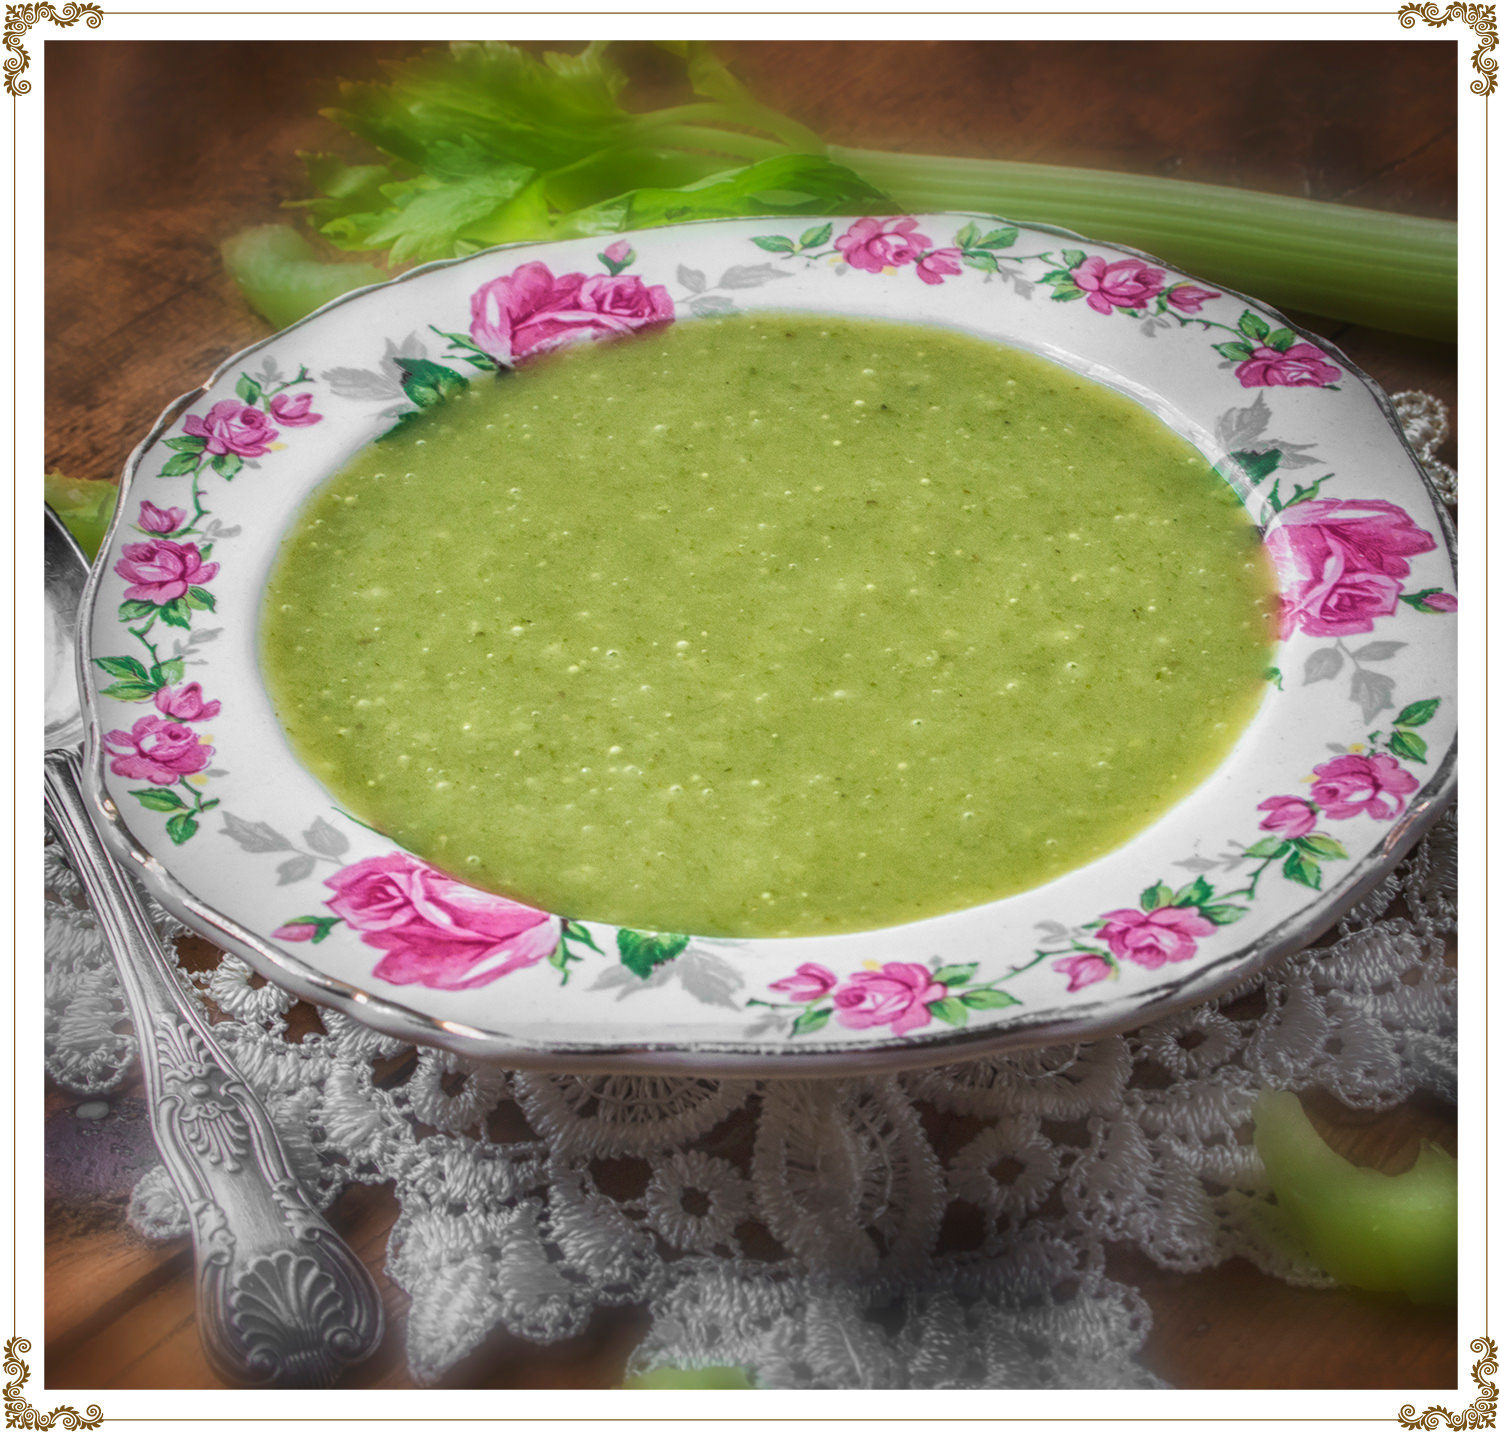 Recipe Cream of celery and swiss chard Gluten-free, Dairy-free, Organic from Cuisine l’Angélique.